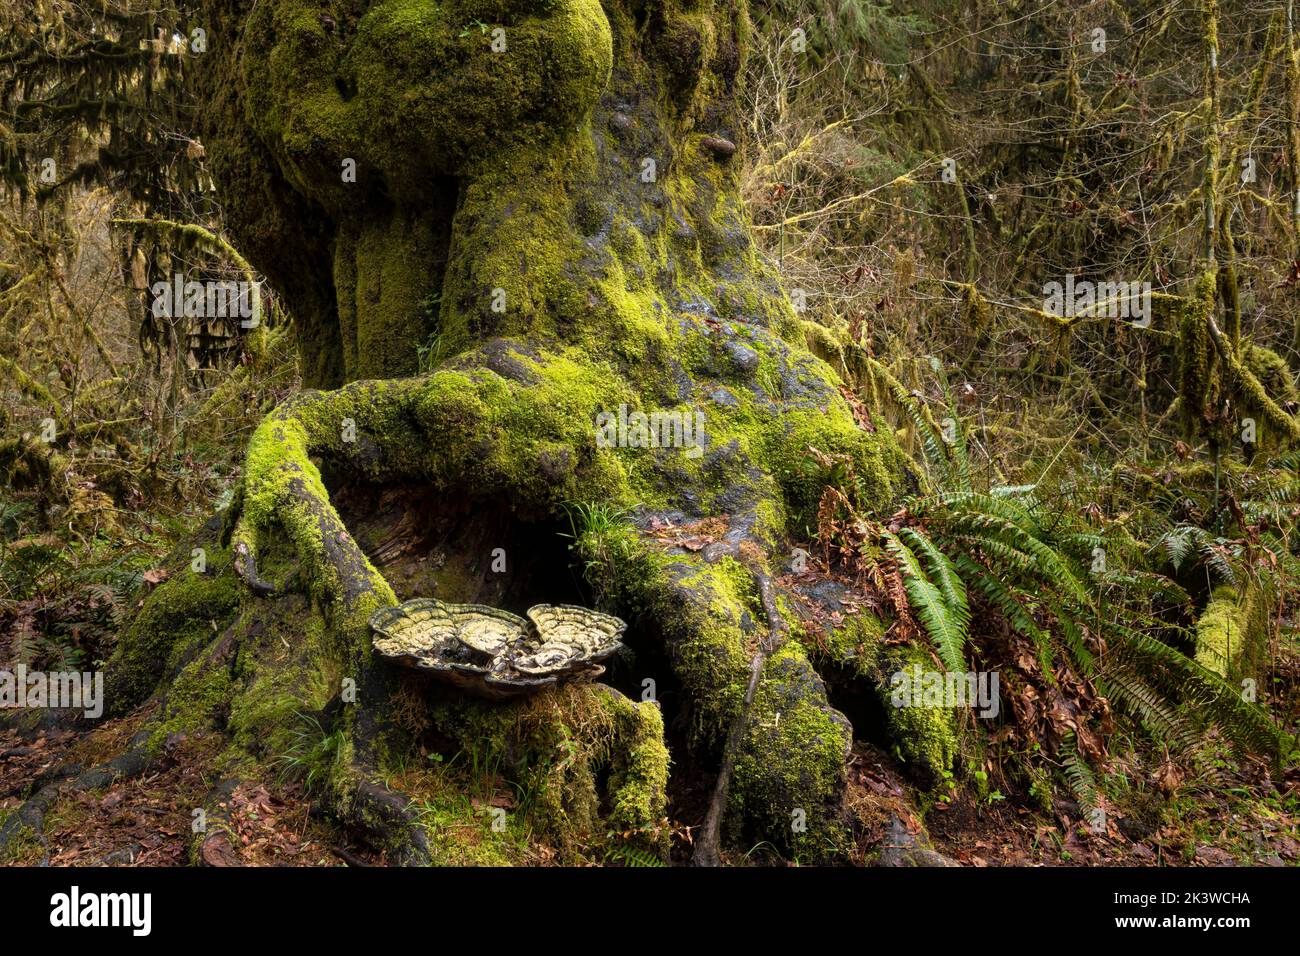 WA22110-00...WASHINGTON - Giant fungus on a tree with a large burl in the Hoh Rain Forest, Olympic National Forest. Stock Photo